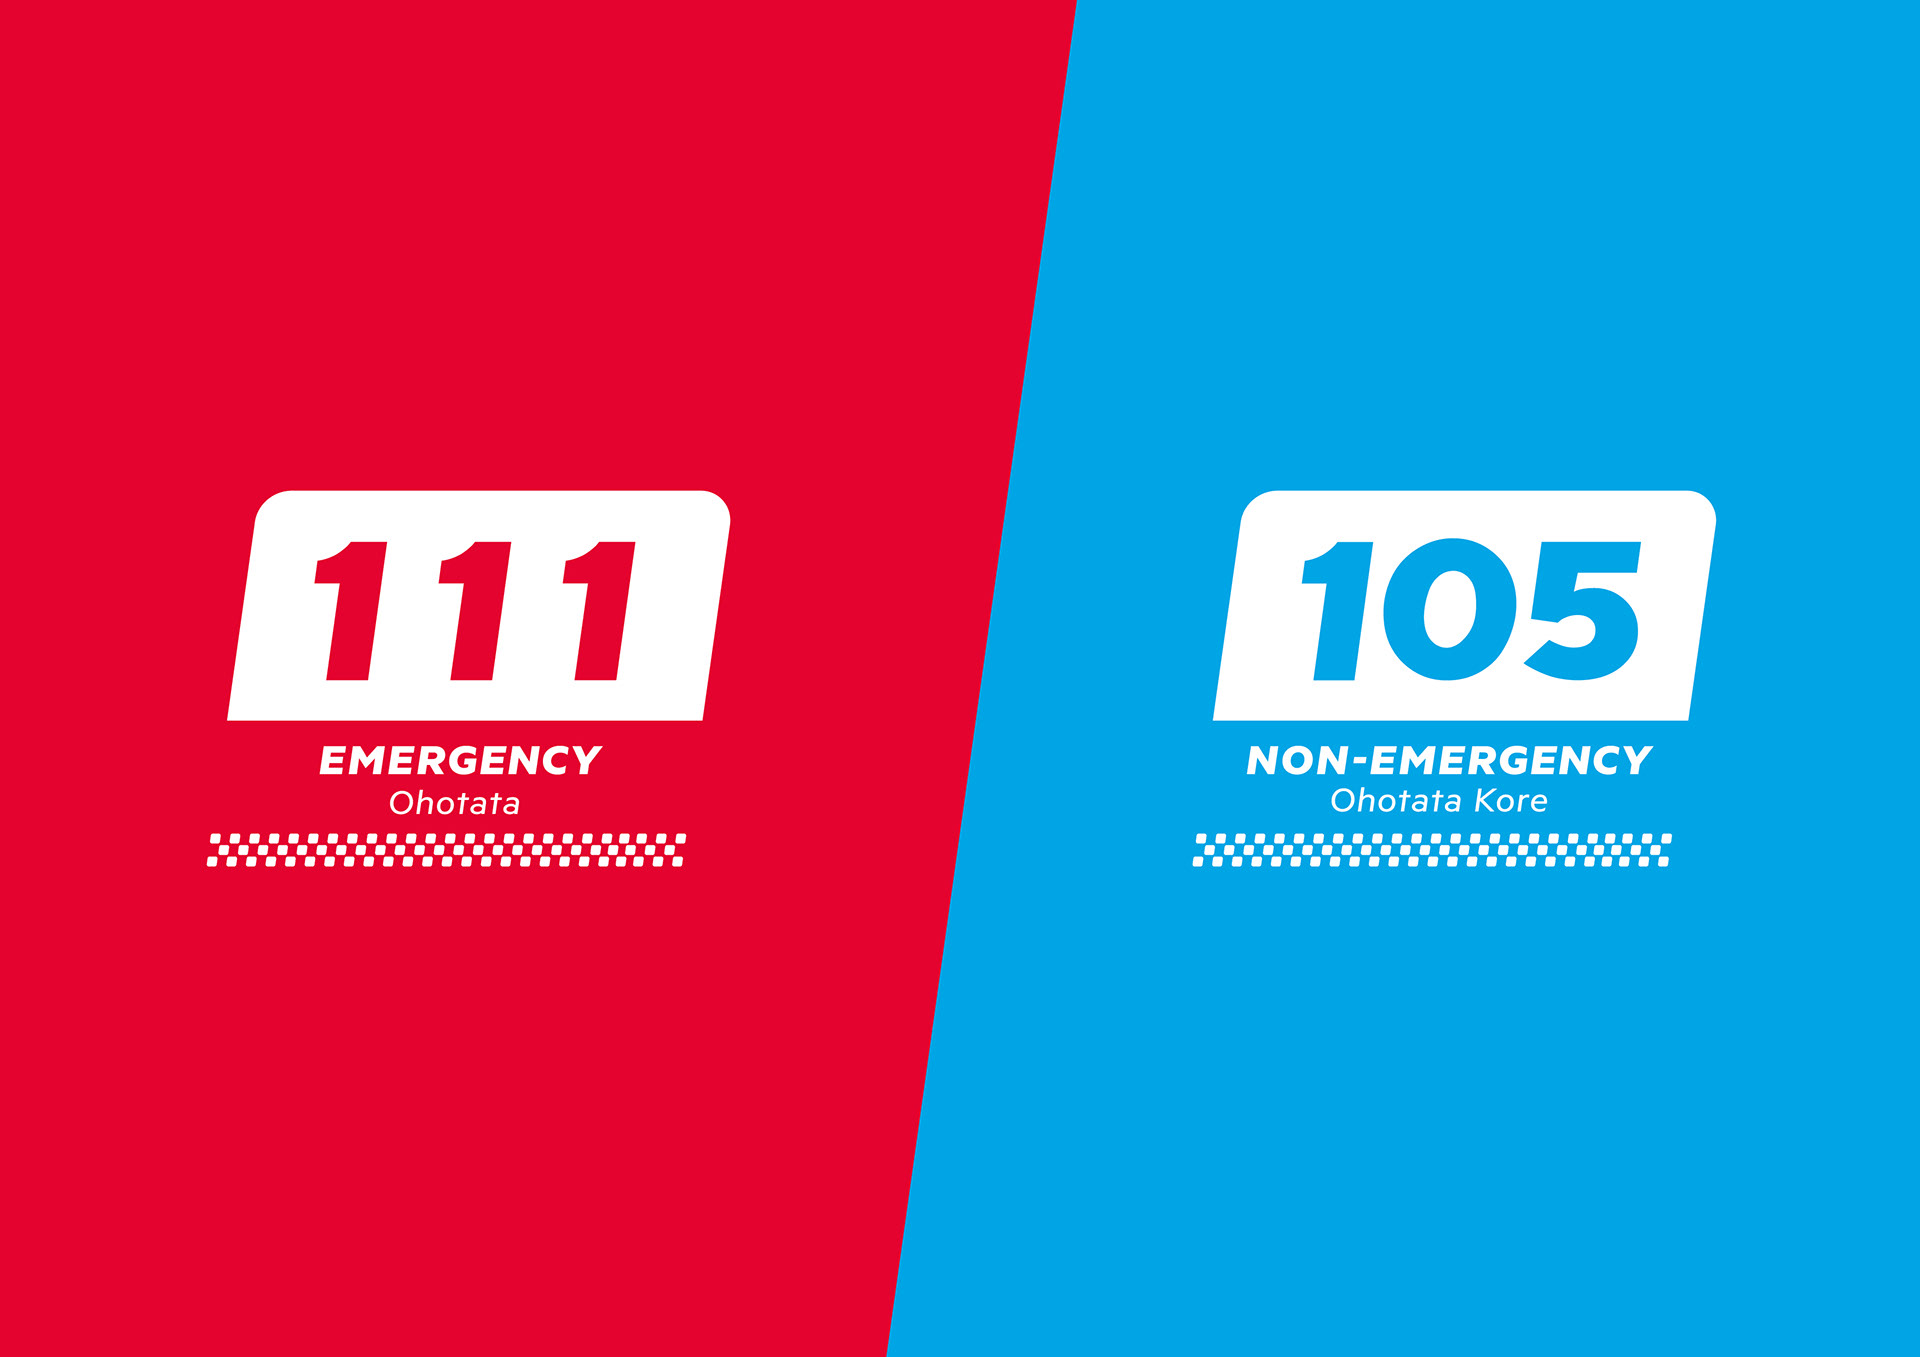 New Zealand Police - 105 Non-Emergency Number.